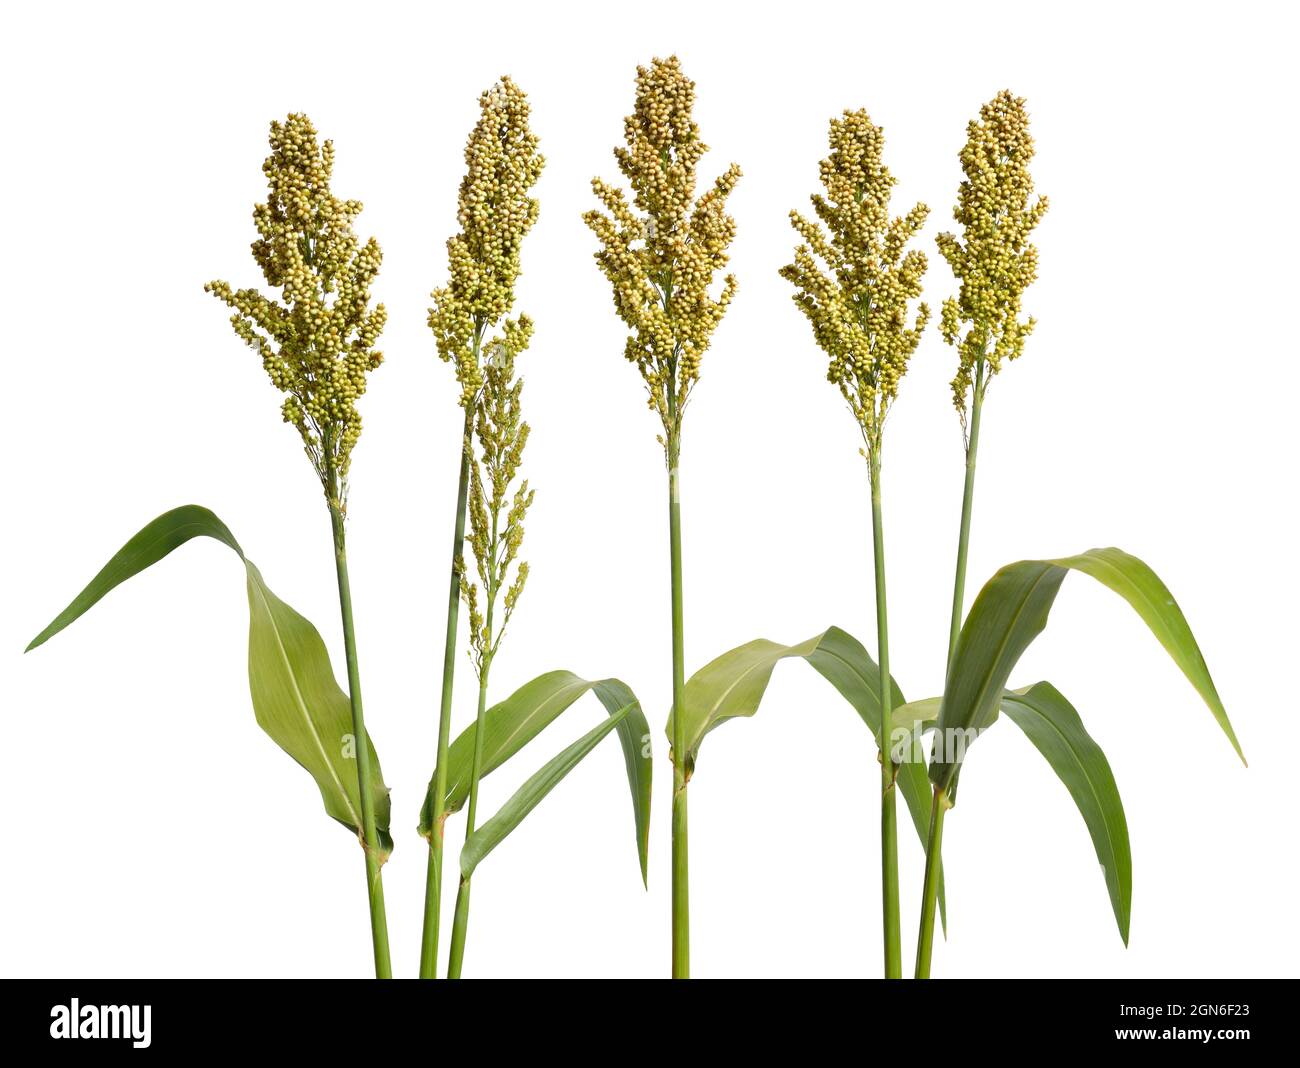 Sorghum bicolor, commonly called sorghum and also known as great millet, durra, jowari, jowar or milo. Isolated. Stock Photo